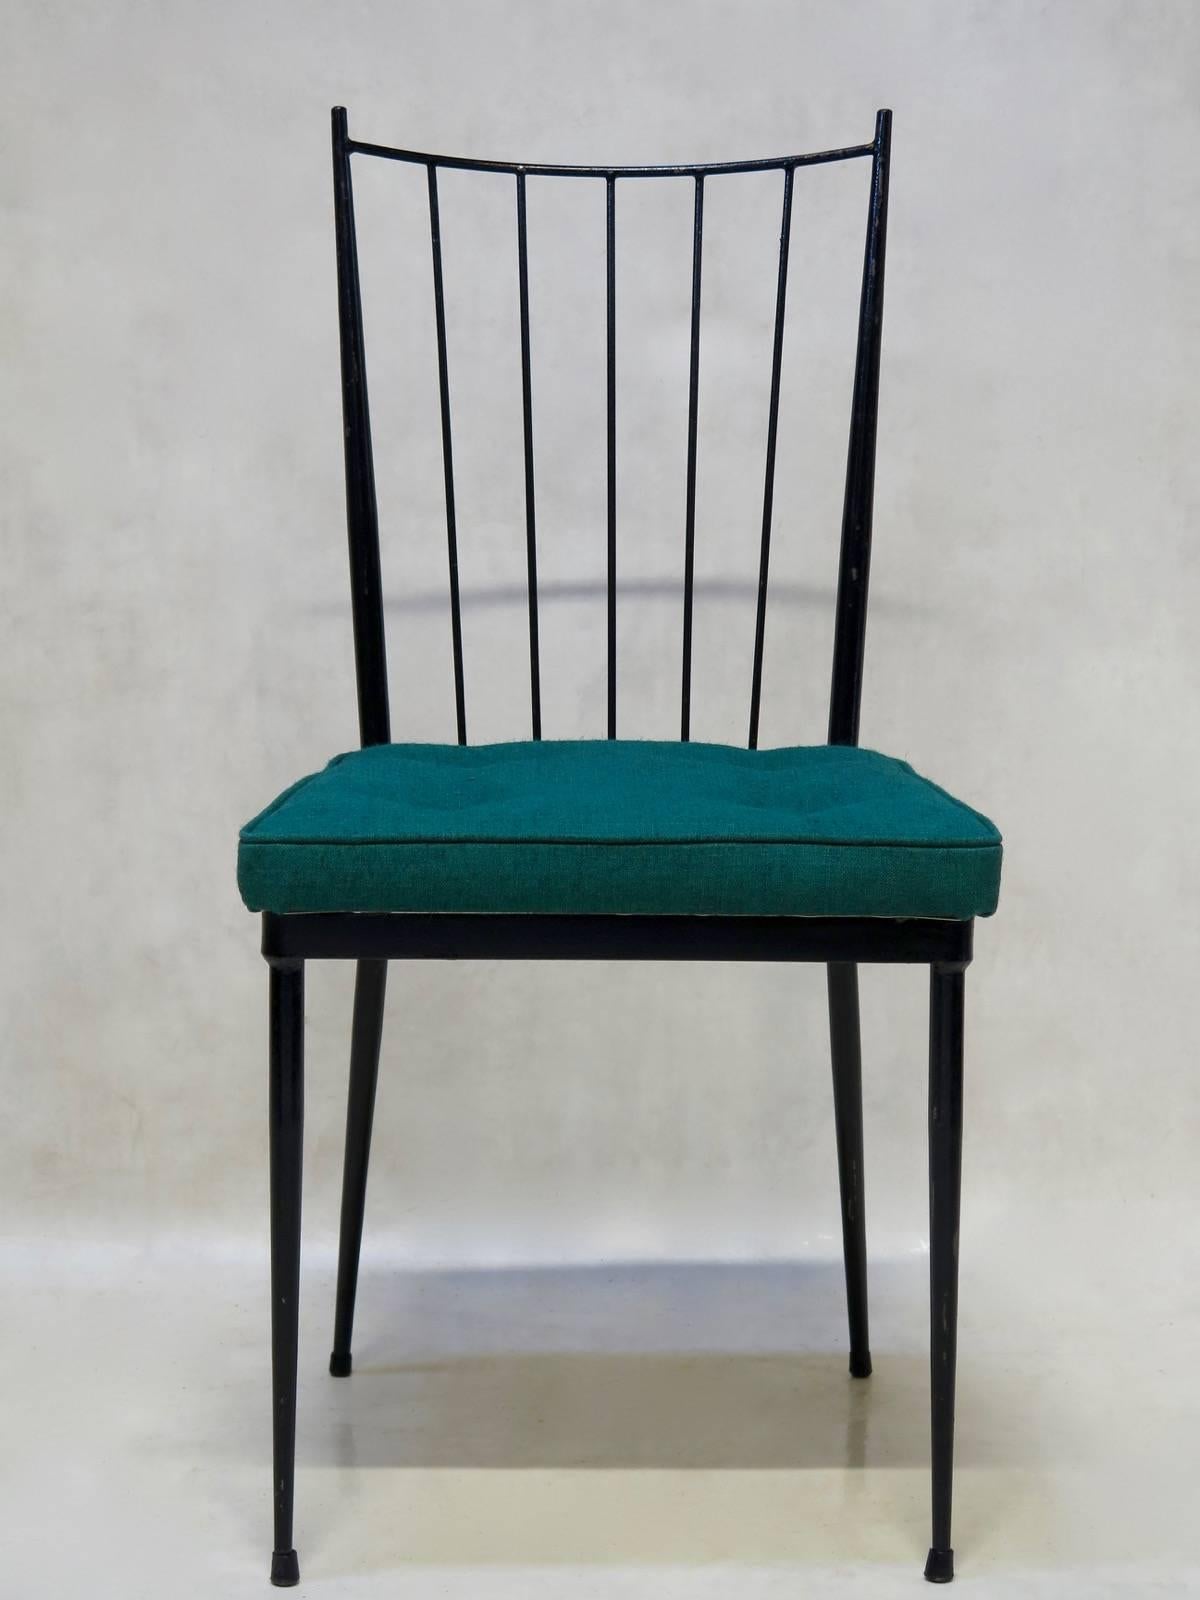 Chic and sturdy yet lightweight set of eight black-painted metal chairs attributed to French designer Colette Gueden. The backs are curved, the seats wide and generous, upholstered in teal-colored fabric. True to the values of the era, they combine